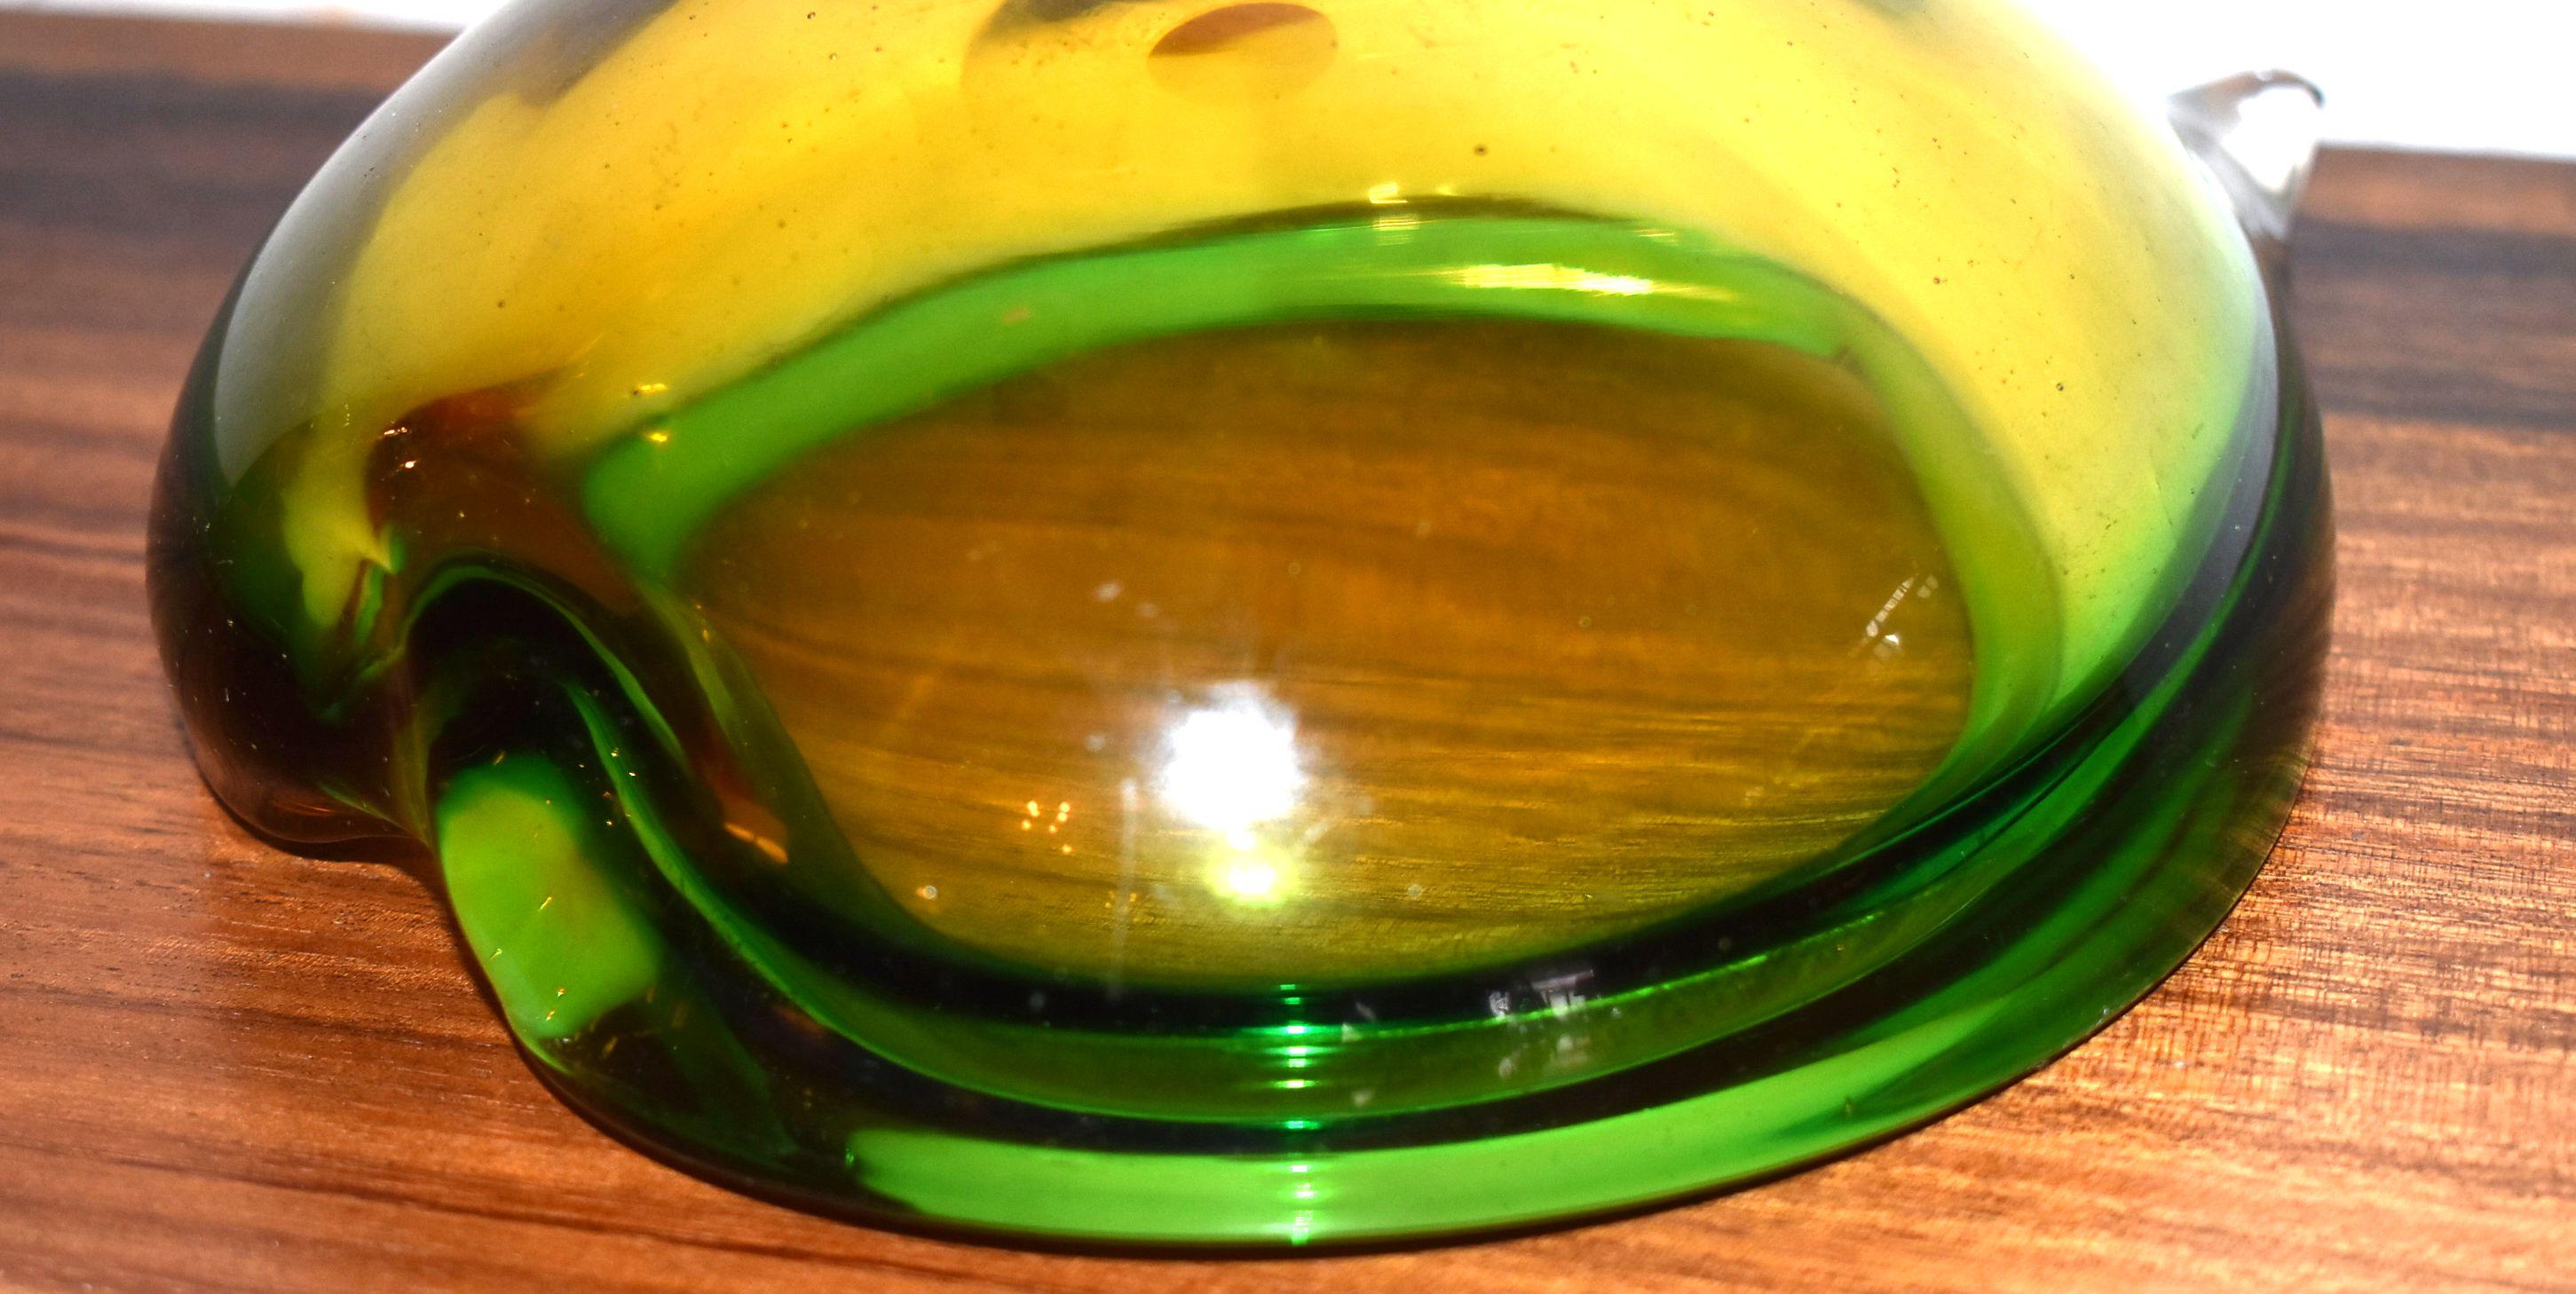 Mid-Century Modern 1960s Large Heart Shaped Murano Glass Ashtray Bowl For Sale